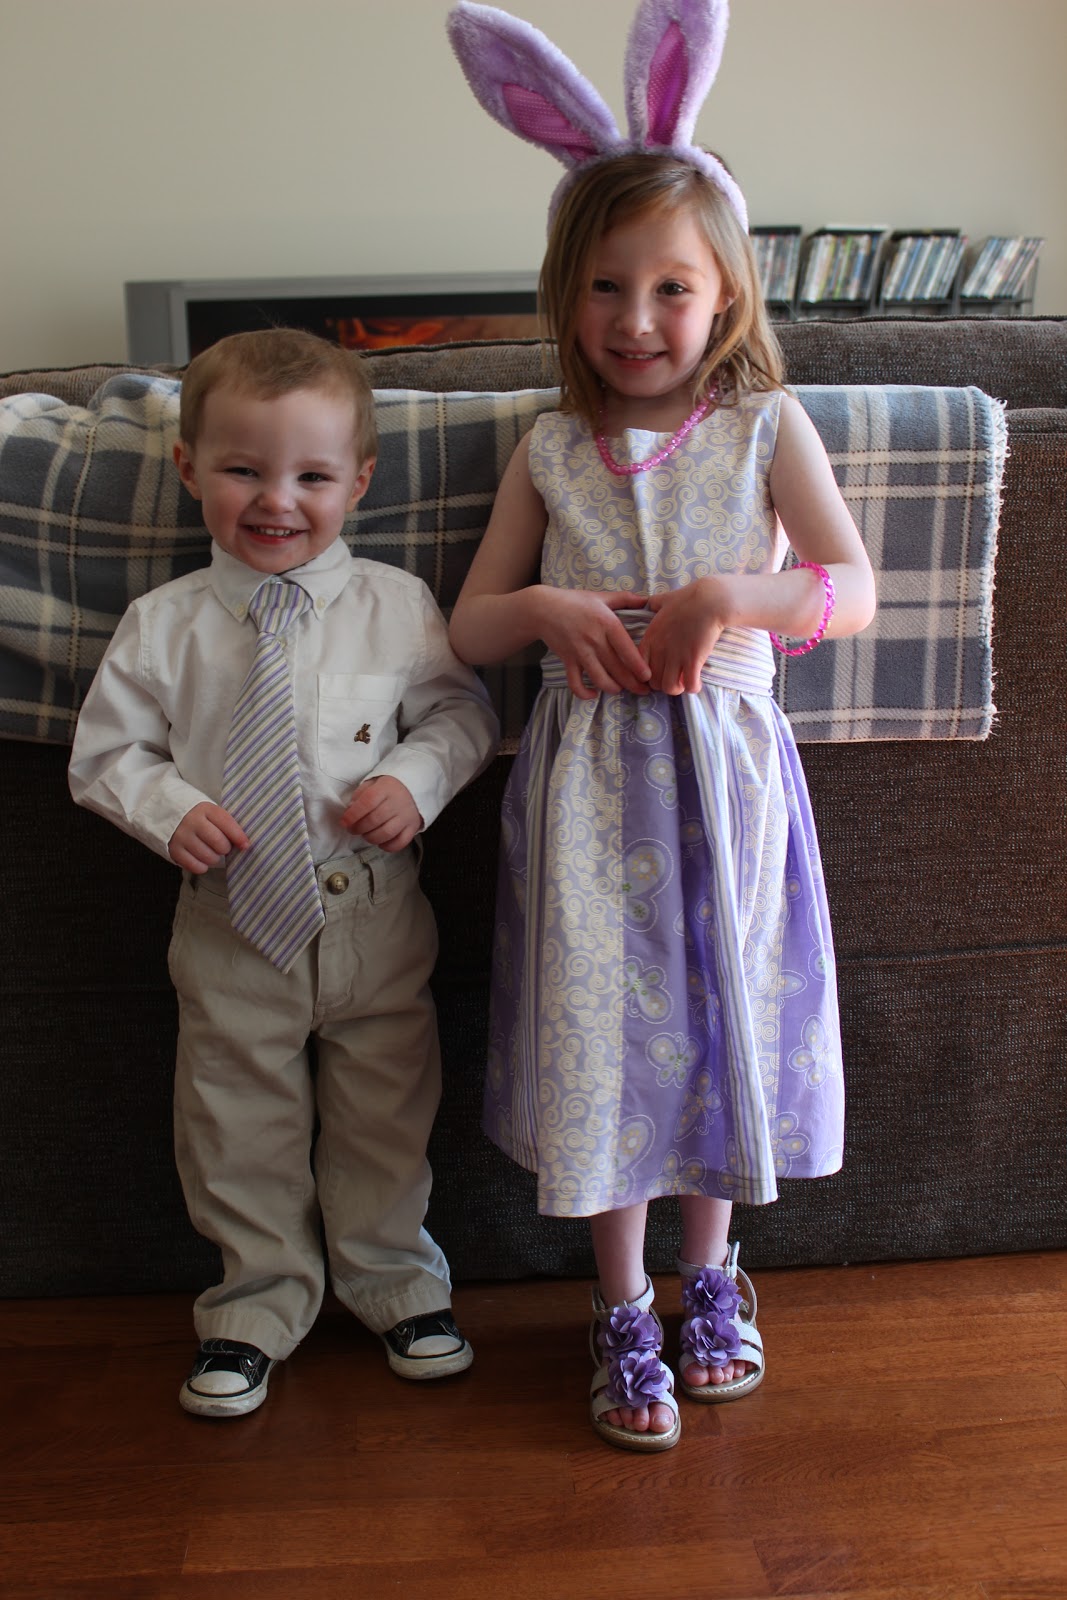 Once Upon A Notion: All dressed in their Easter best